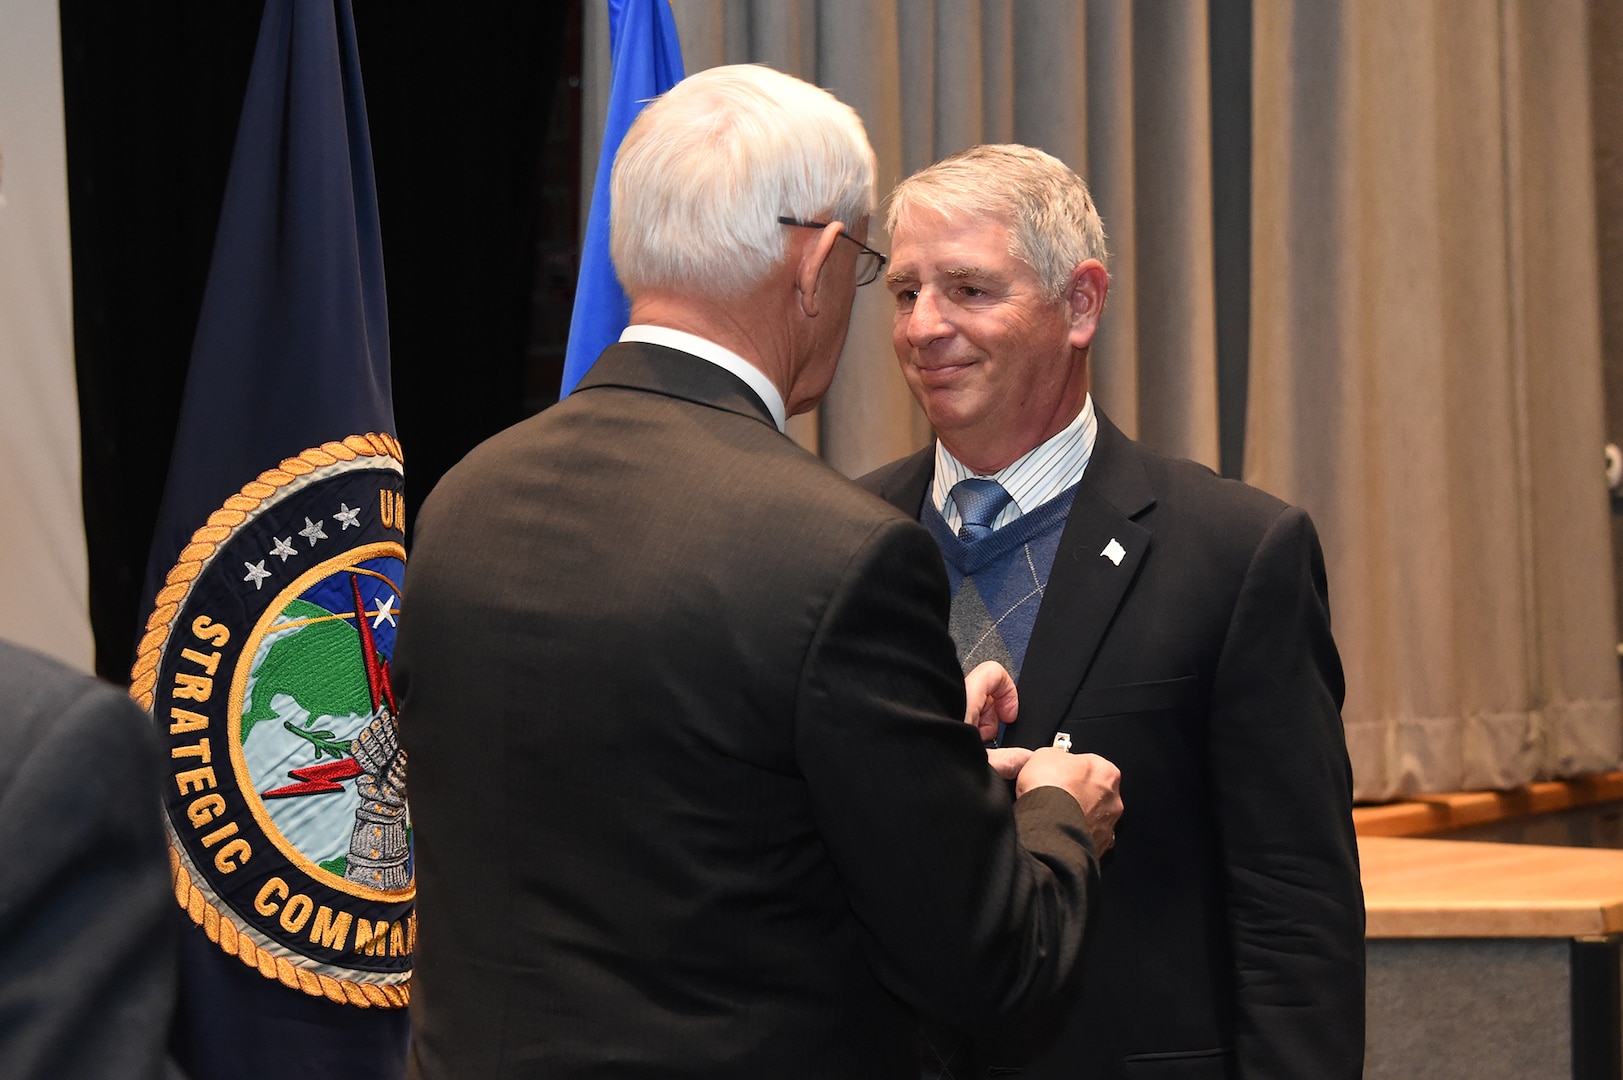 Patrick McVay (left), U.S. Strategic Command (USSTRATCOM) director of joint exercises, training and assessments, presents a retirement pin to Dr. William Astley, USSTRATCOM resiliency coordinator, during Astley’s retirement ceremony at Offutt Air Force Base, Neb., Nov. 30, 2017. Astley retired after 36-plus years of service as an Air Force officer and government civilian. Throughout his 11 years with USSTRATCOM, Astley led a team that developed several programs and activities to ensure members of the command remain sharp, fresh and productive. One of nine Department of Defense unified combatant commands, USSTRATCOM has global responsibilities assigned through the Unified Command Plan that include strategic deterrence, nuclear operations, space operations, joint electromagnetic spectrum operations, global strike, missile defense, and analysis and targeting.